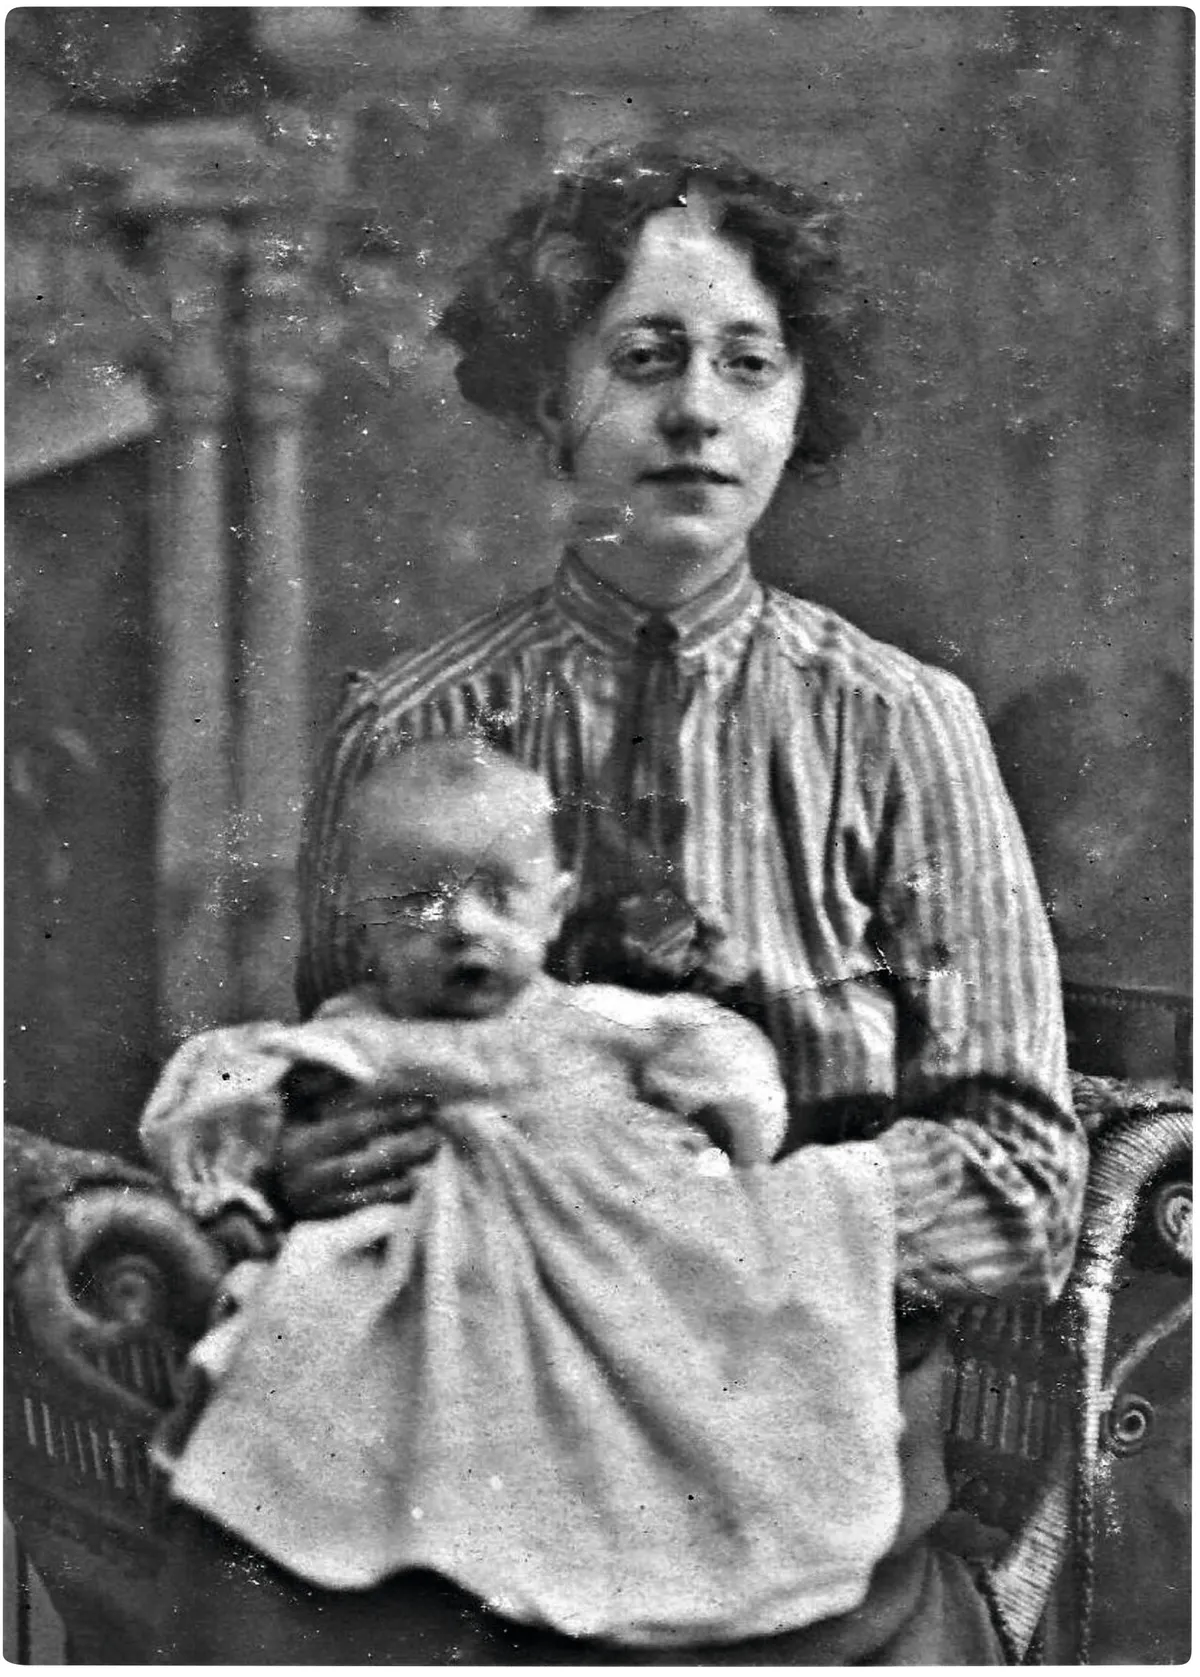 Black and white photograph of a young woman in Edwardian dress wearing spectacles and holding a baby